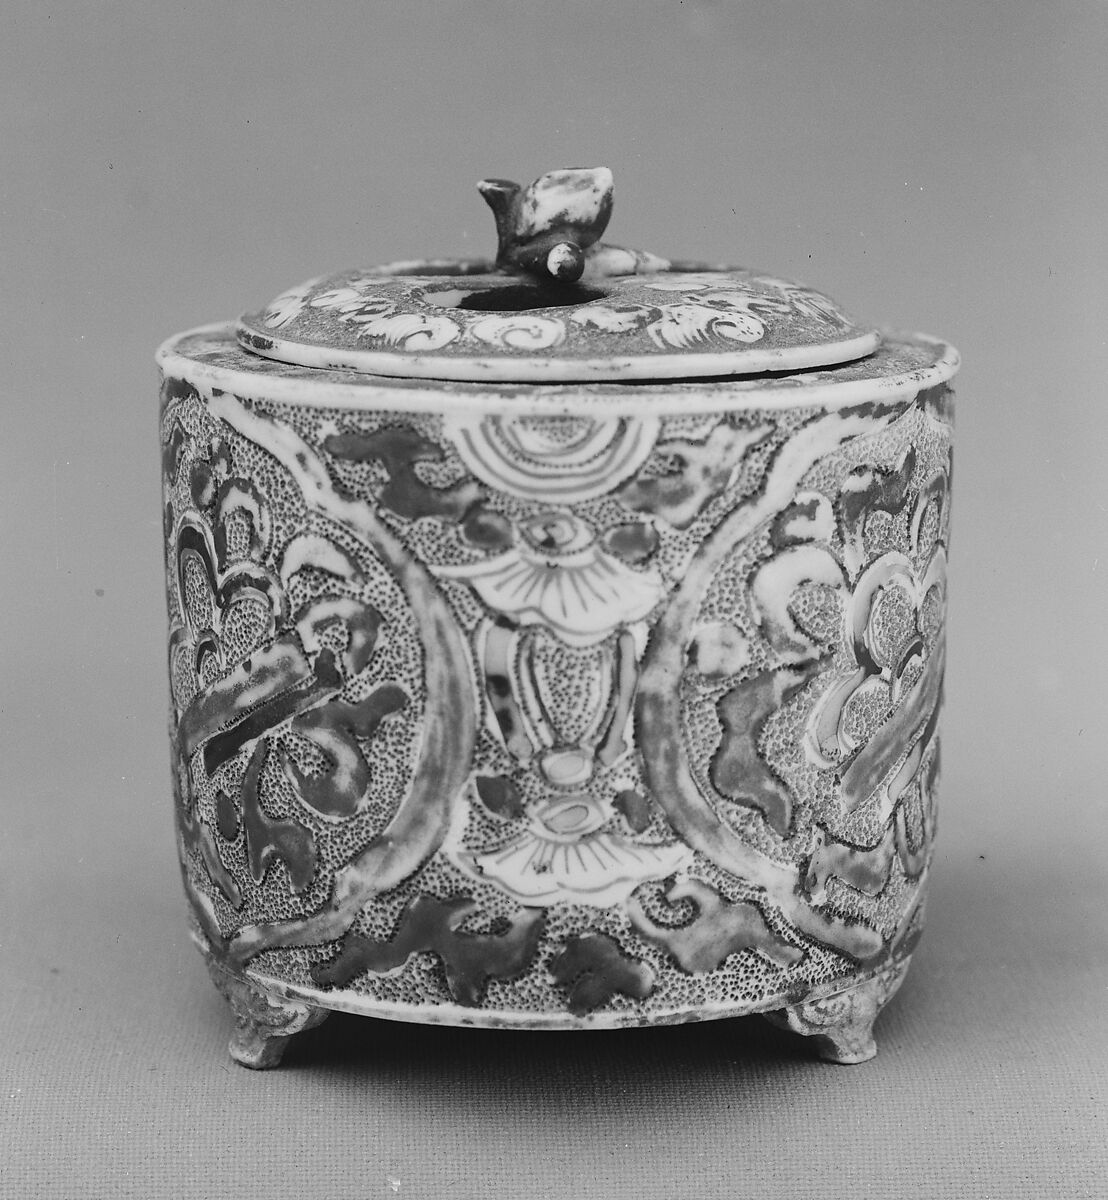 Incense Burner, White porcelain with decoration of iron red, gold and silver, Japan 